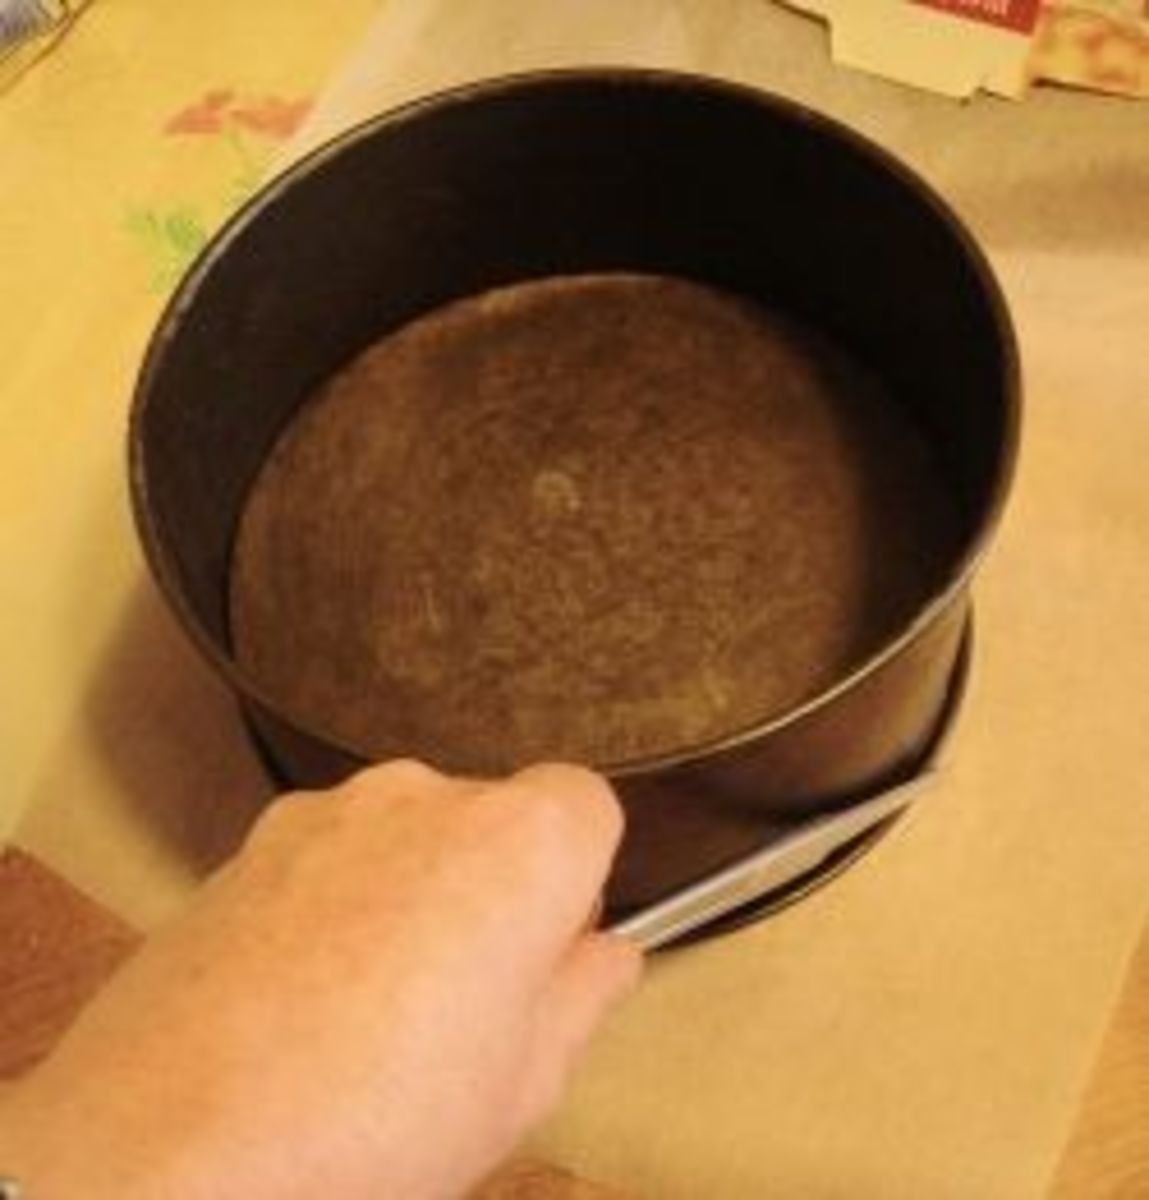 Marking the base of the cake tin with scissors.